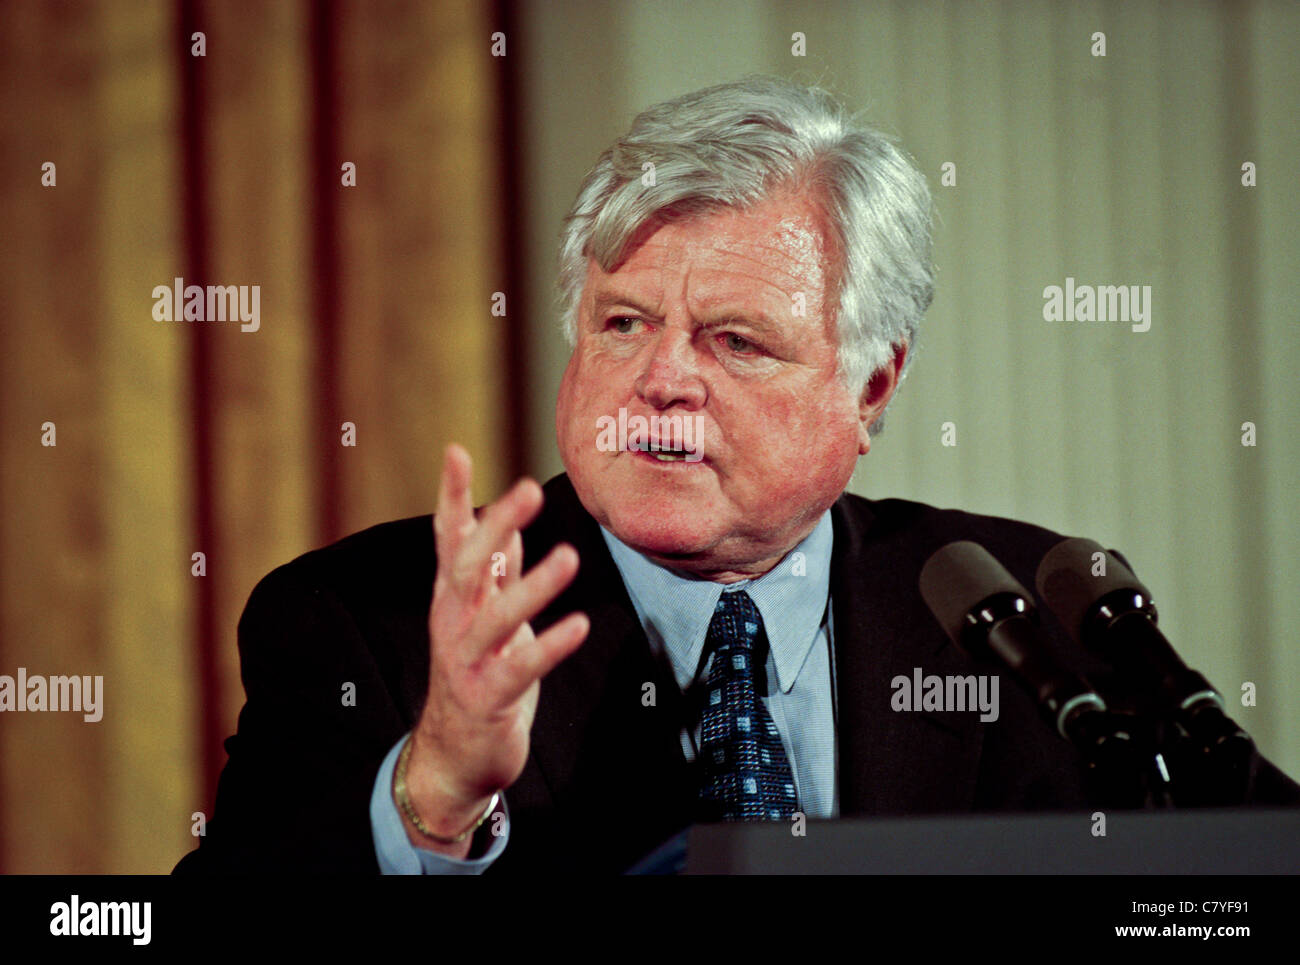 Senator Ted Kennedy during an event in the East Room of the White House January 13, 1999 Stock Photo